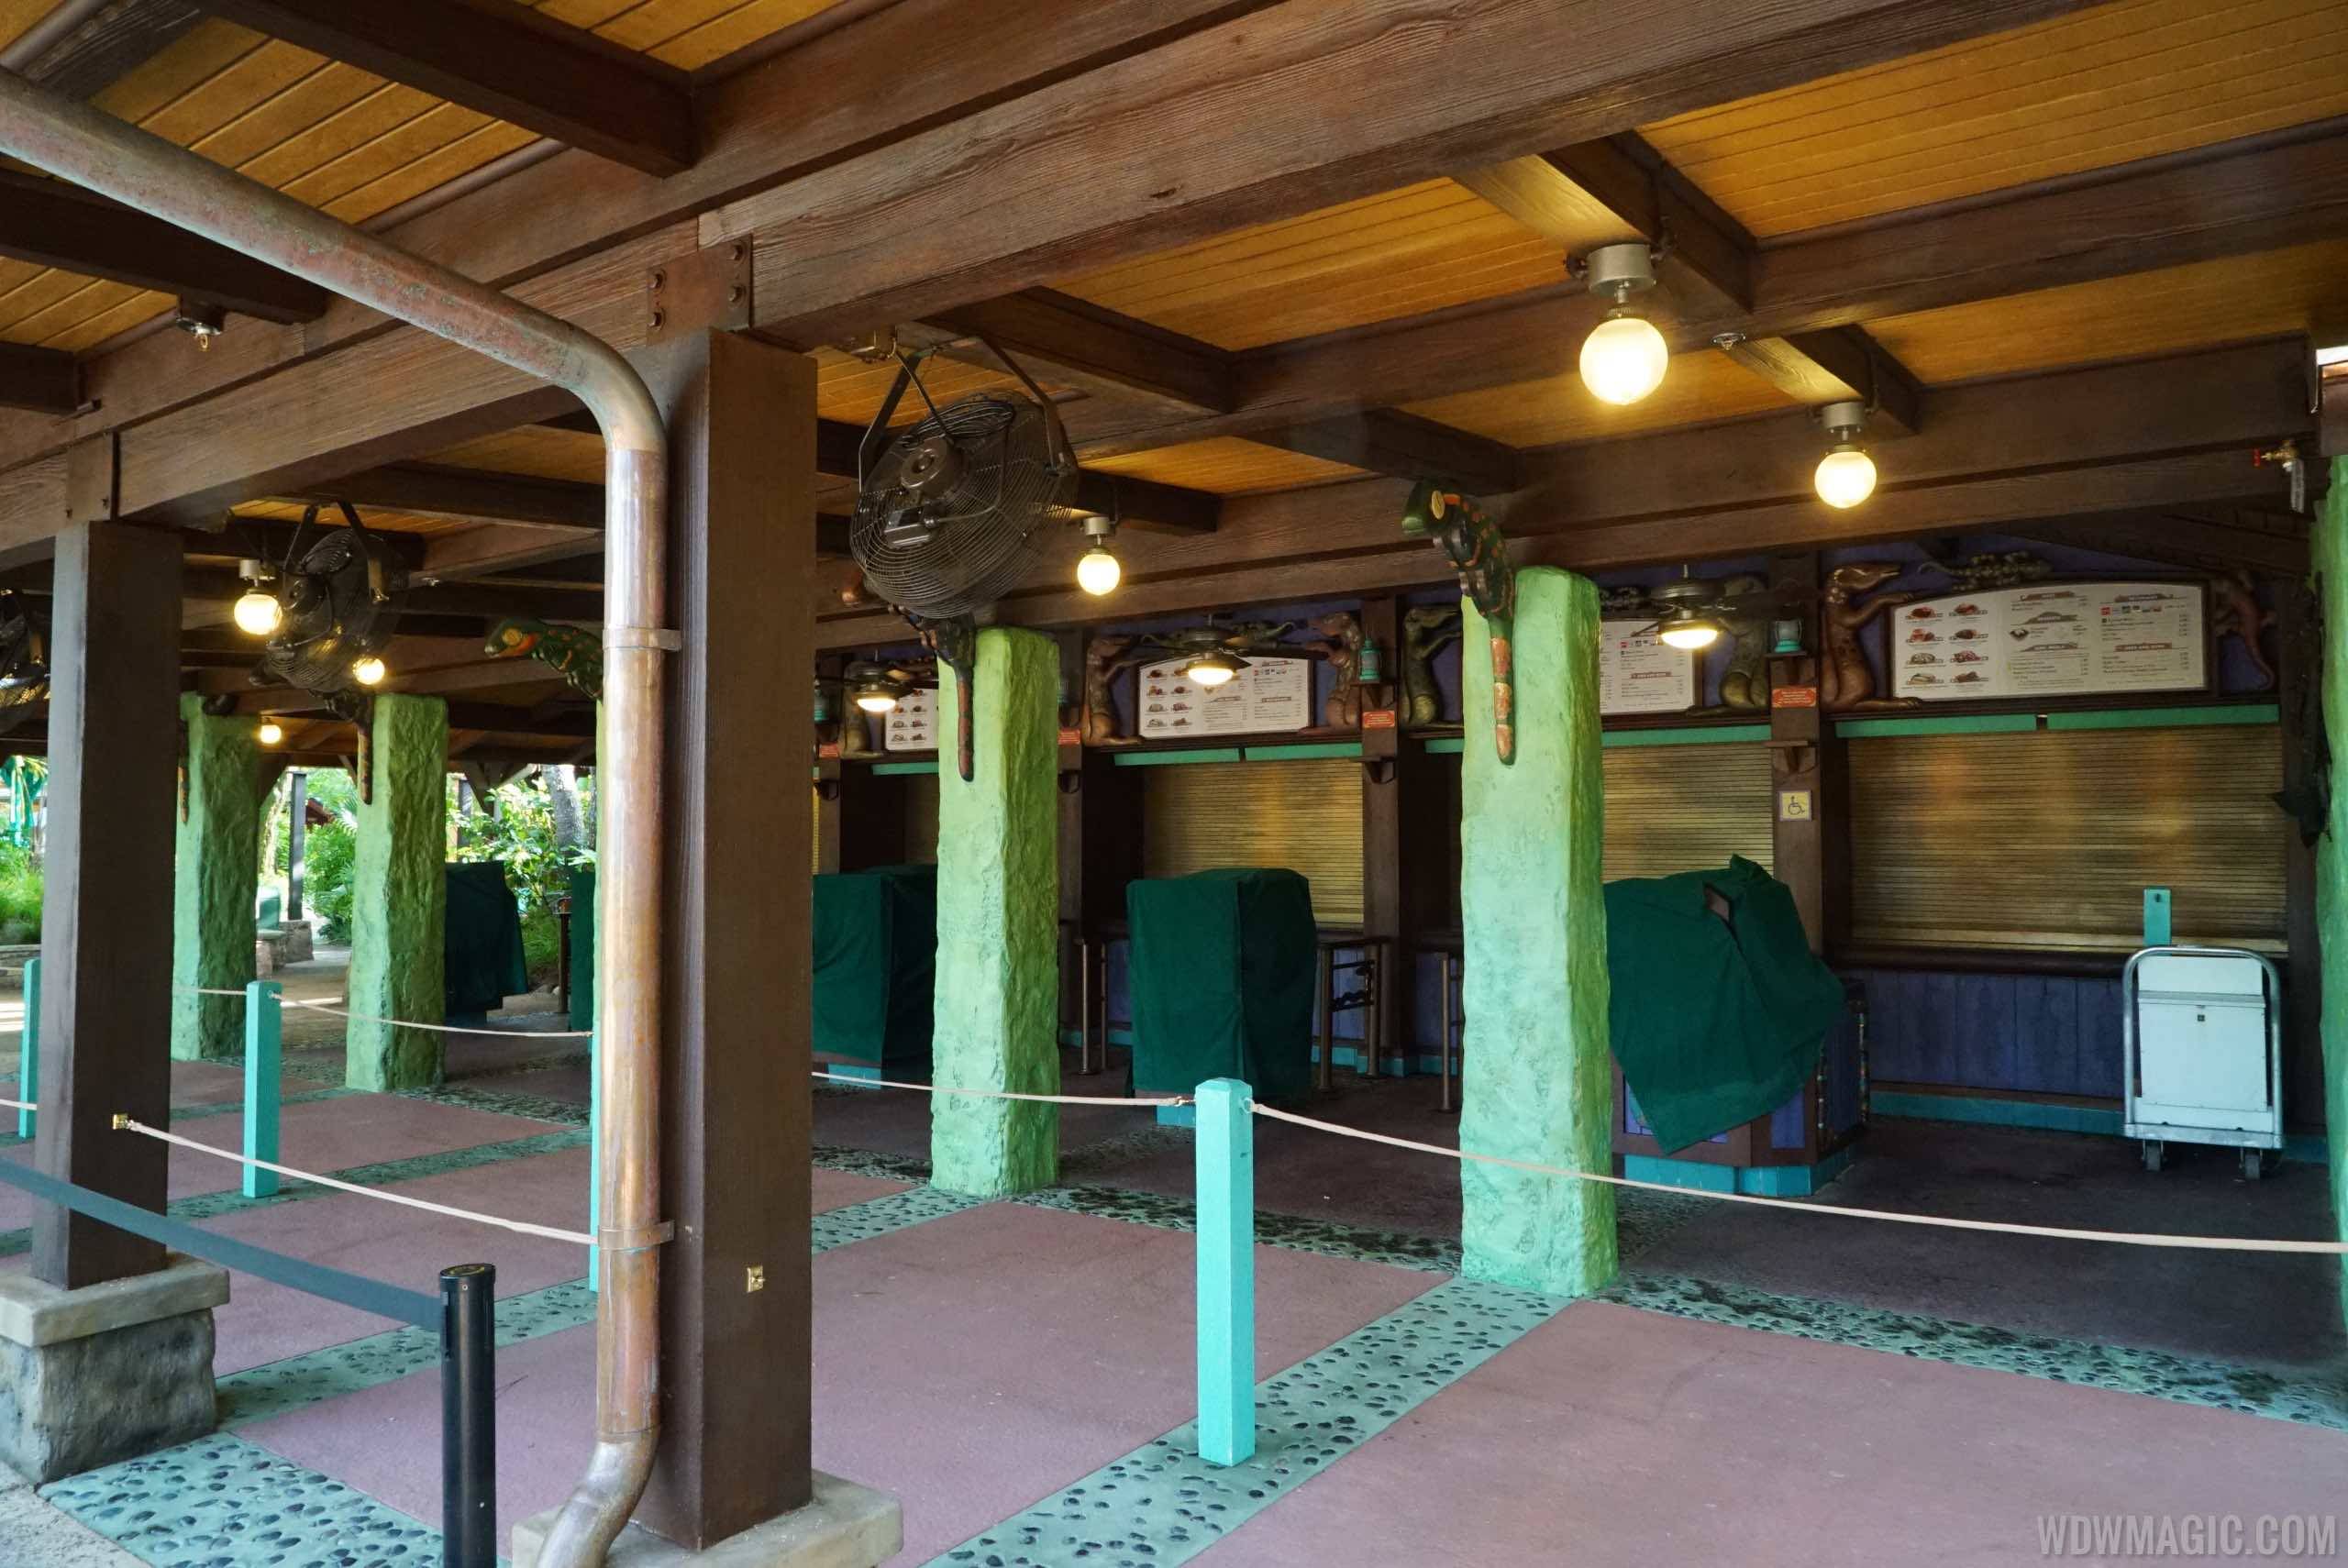 Flame Tree Barbecue reopening June 2015